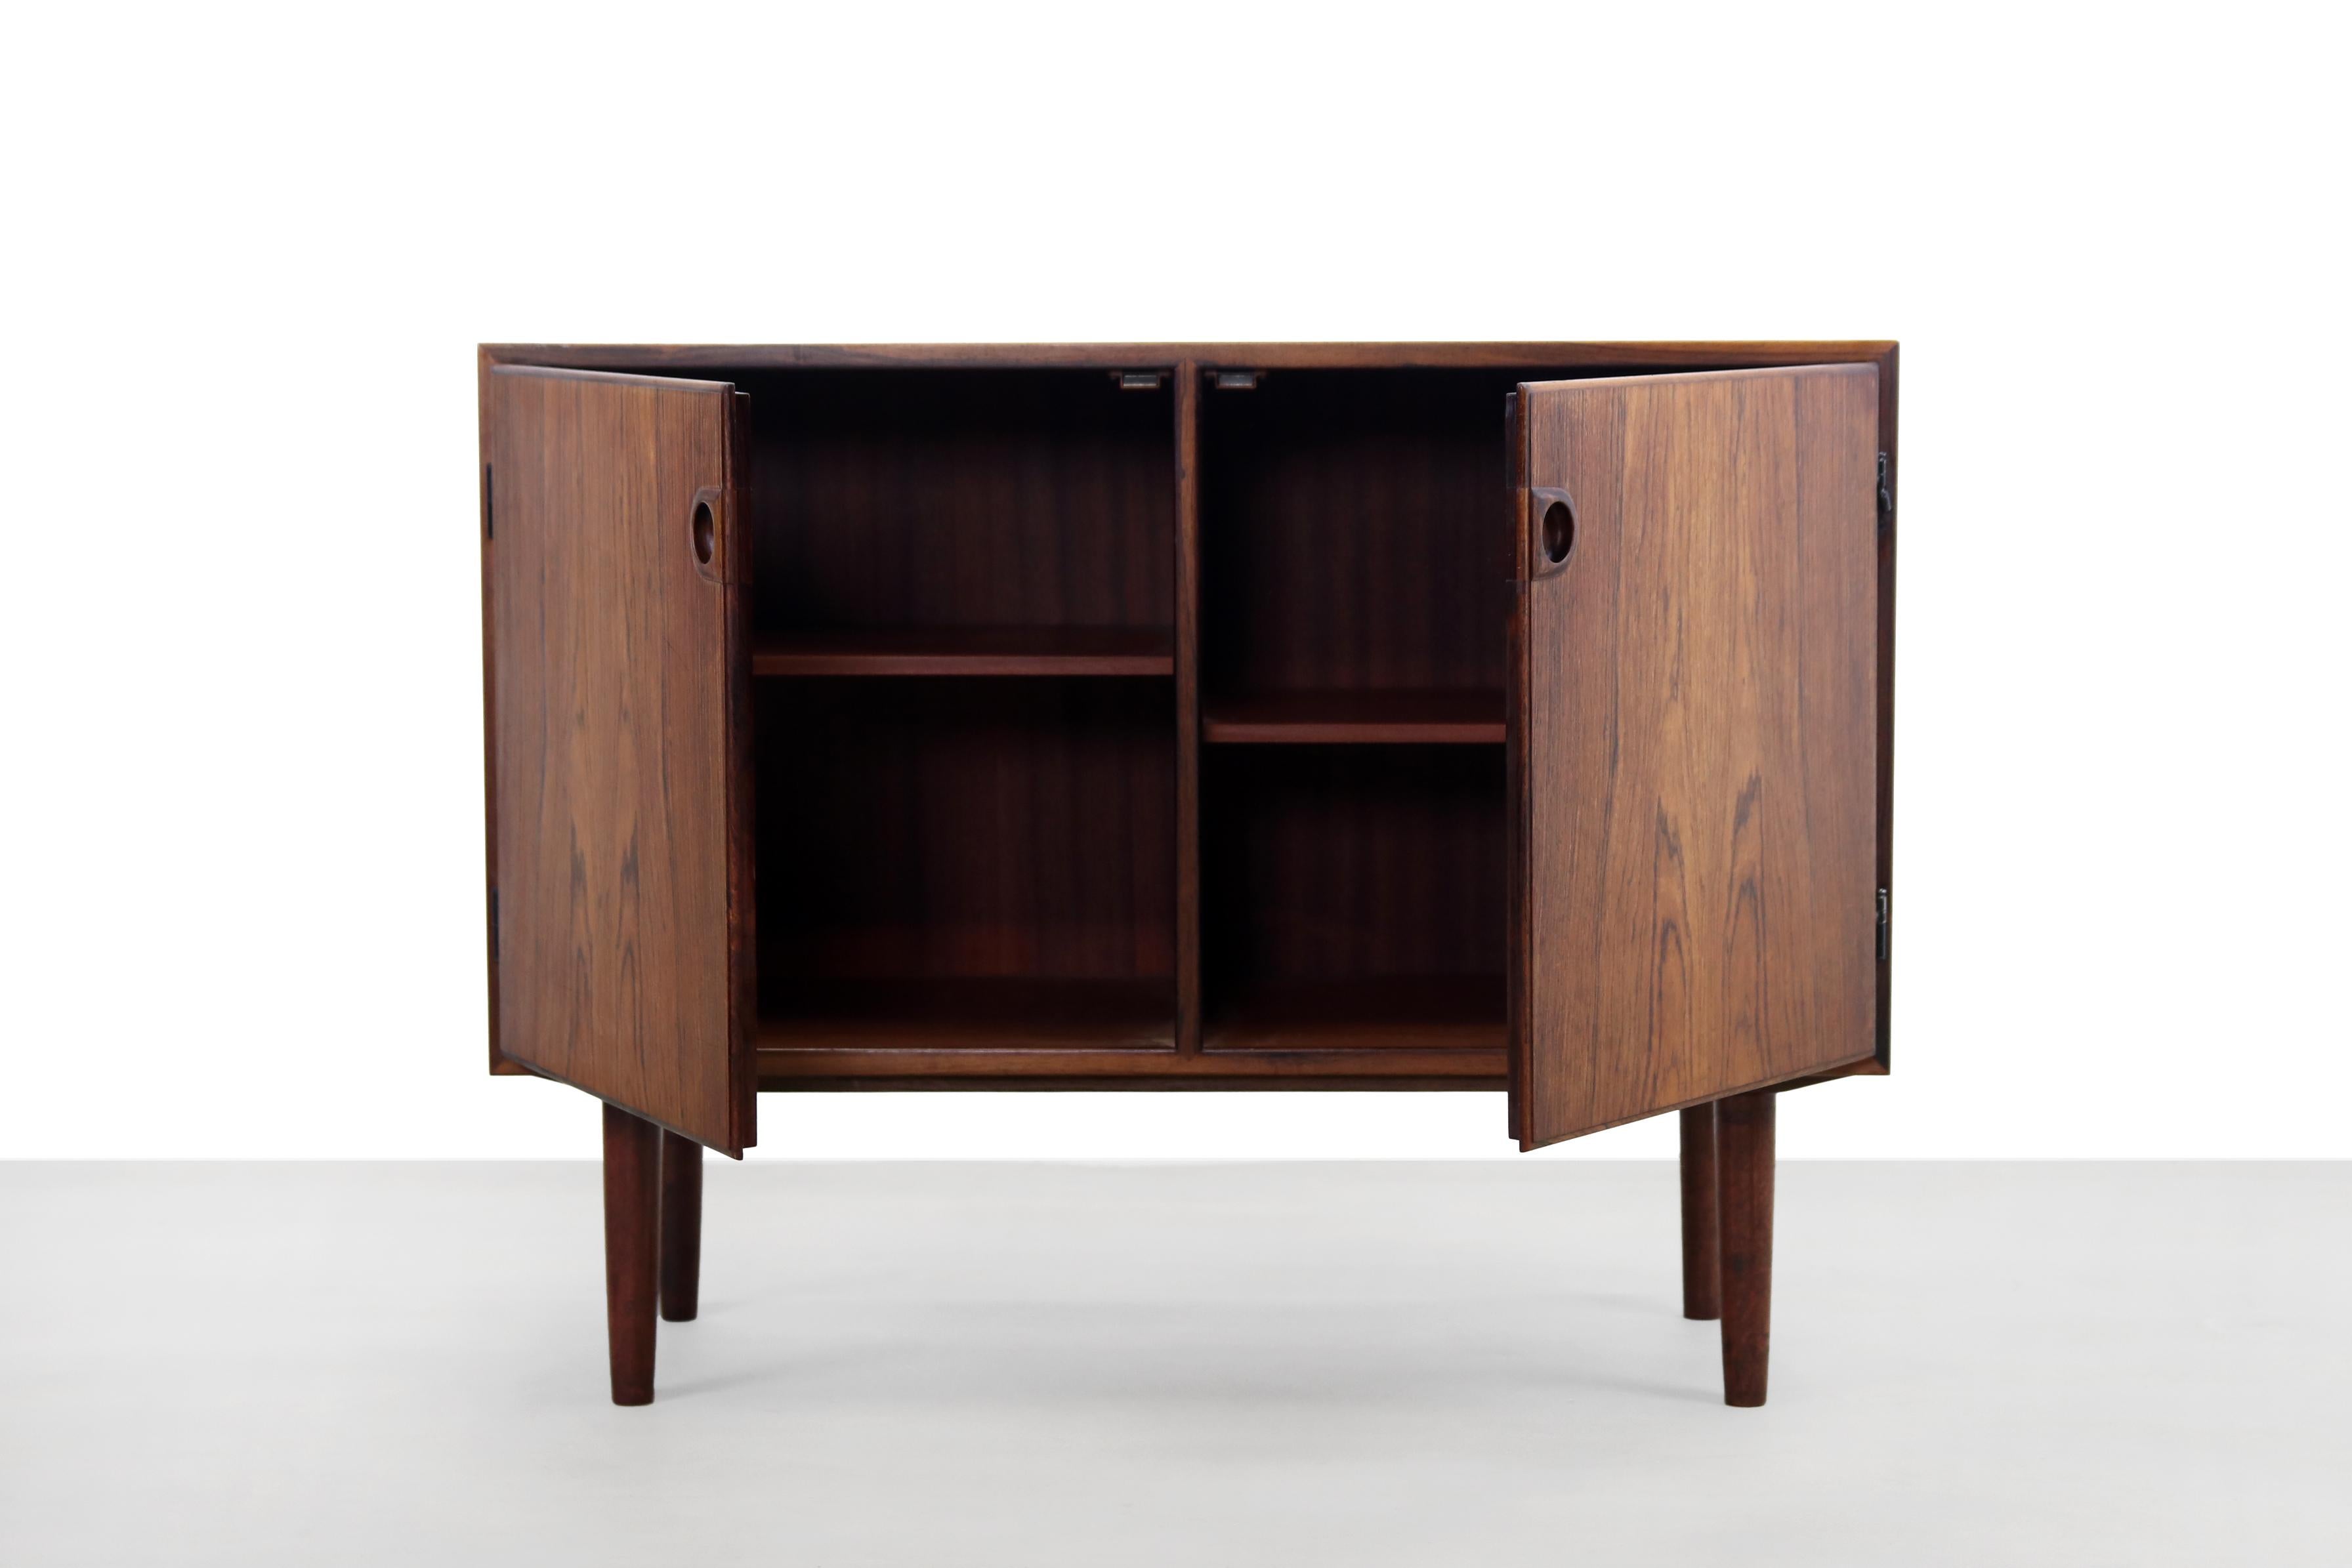 Beautiful Danish design sideboard with two doors. Made of veneer and very nicely shaped solid hardwood handles and legs. This dresser is not too wide and is therefore perfect for a somewhat smaller space. Due to the type of wood, this cabinet is